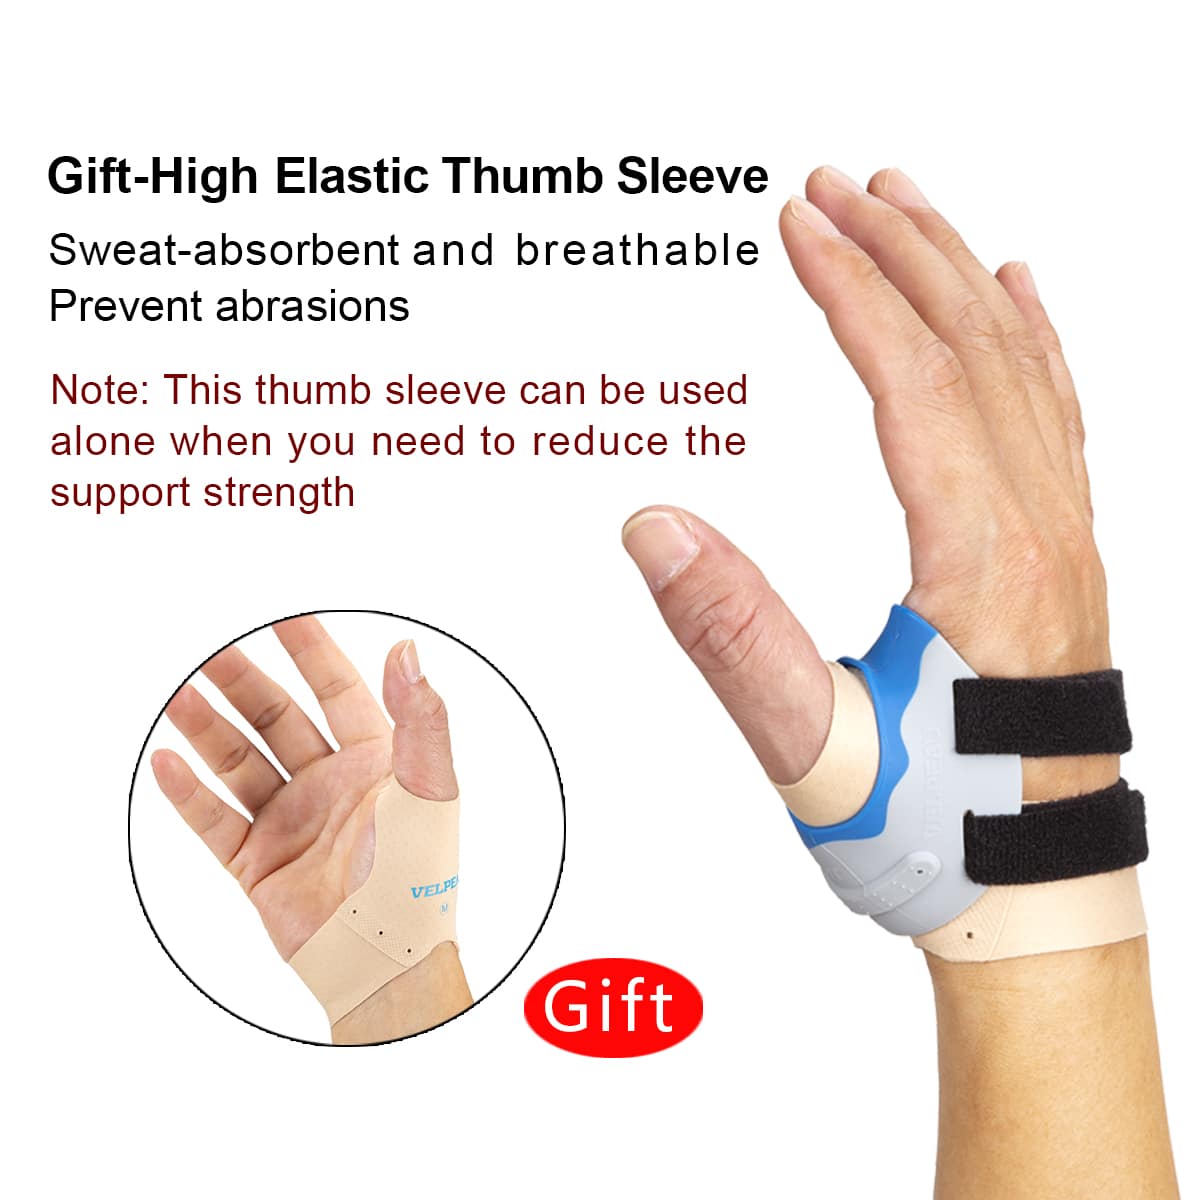 VELPEAU CMC Thumb Orthosis Relieves Arthritis Pain At The Bottom of Thumb Lightweight and Breathable Support Brace With Sleeve